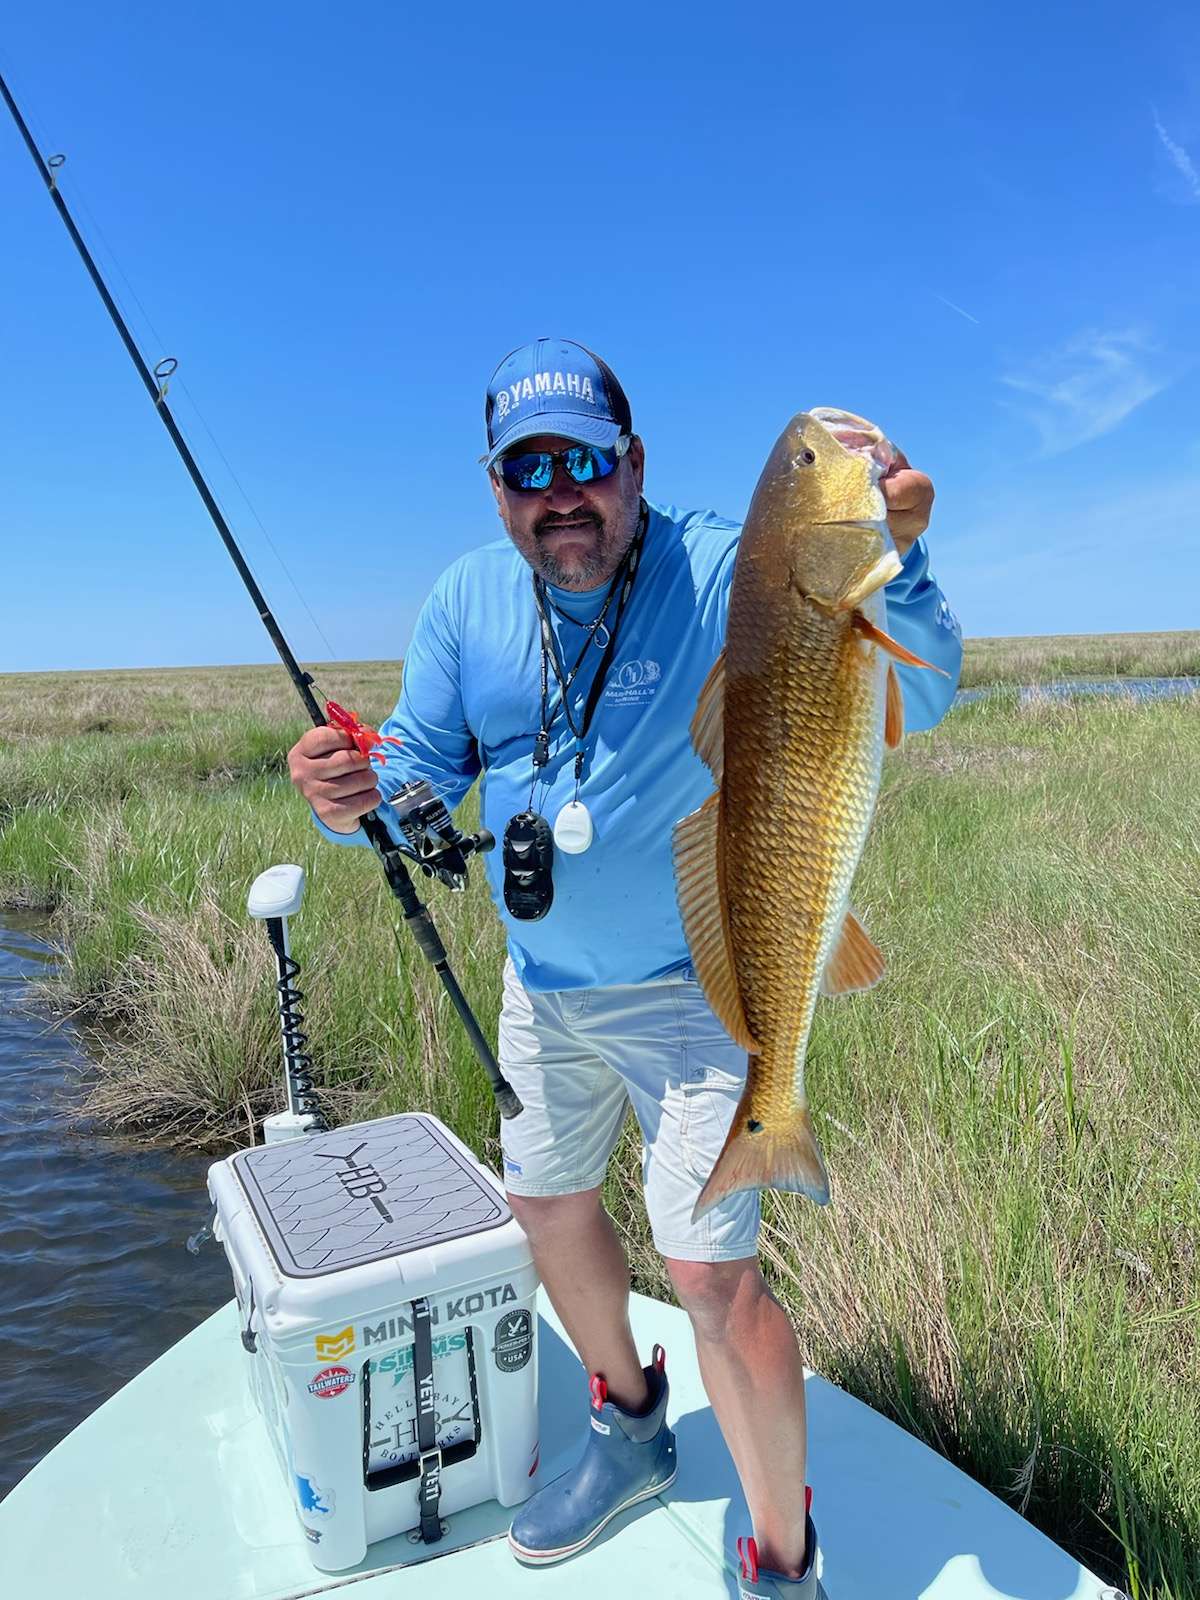 <b>Matt McCabe</b><br>
Captain Matt McCabe is owner of Pro Edge Fishing charters located in Slidell, La. He spends 150 days guiding clients inland saltwater fishing in the marshes and bays of south Louisiana. McCabe was actually born on the lower Texas coast, and he spent a lot of his early childhood in Rockport. McCabe is a longtime Skeeter/Yamaha team pro.
